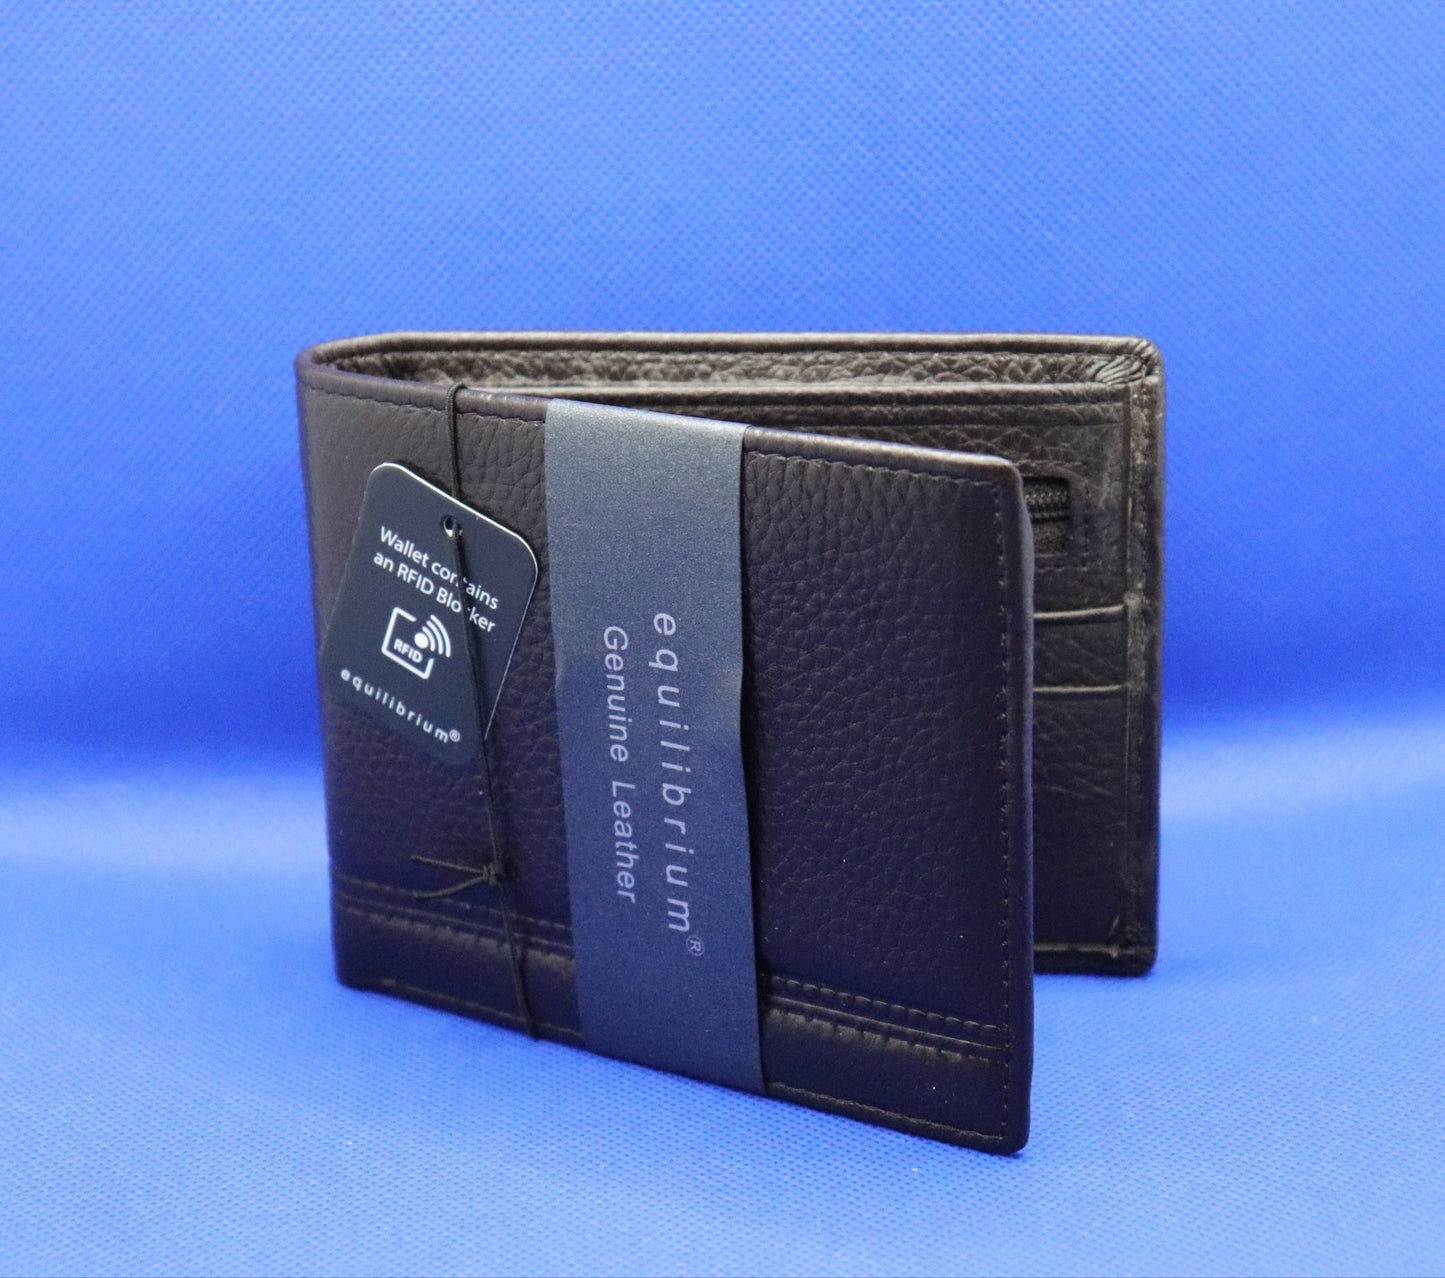 Mens wallet brown leather - A & M News and Gifts